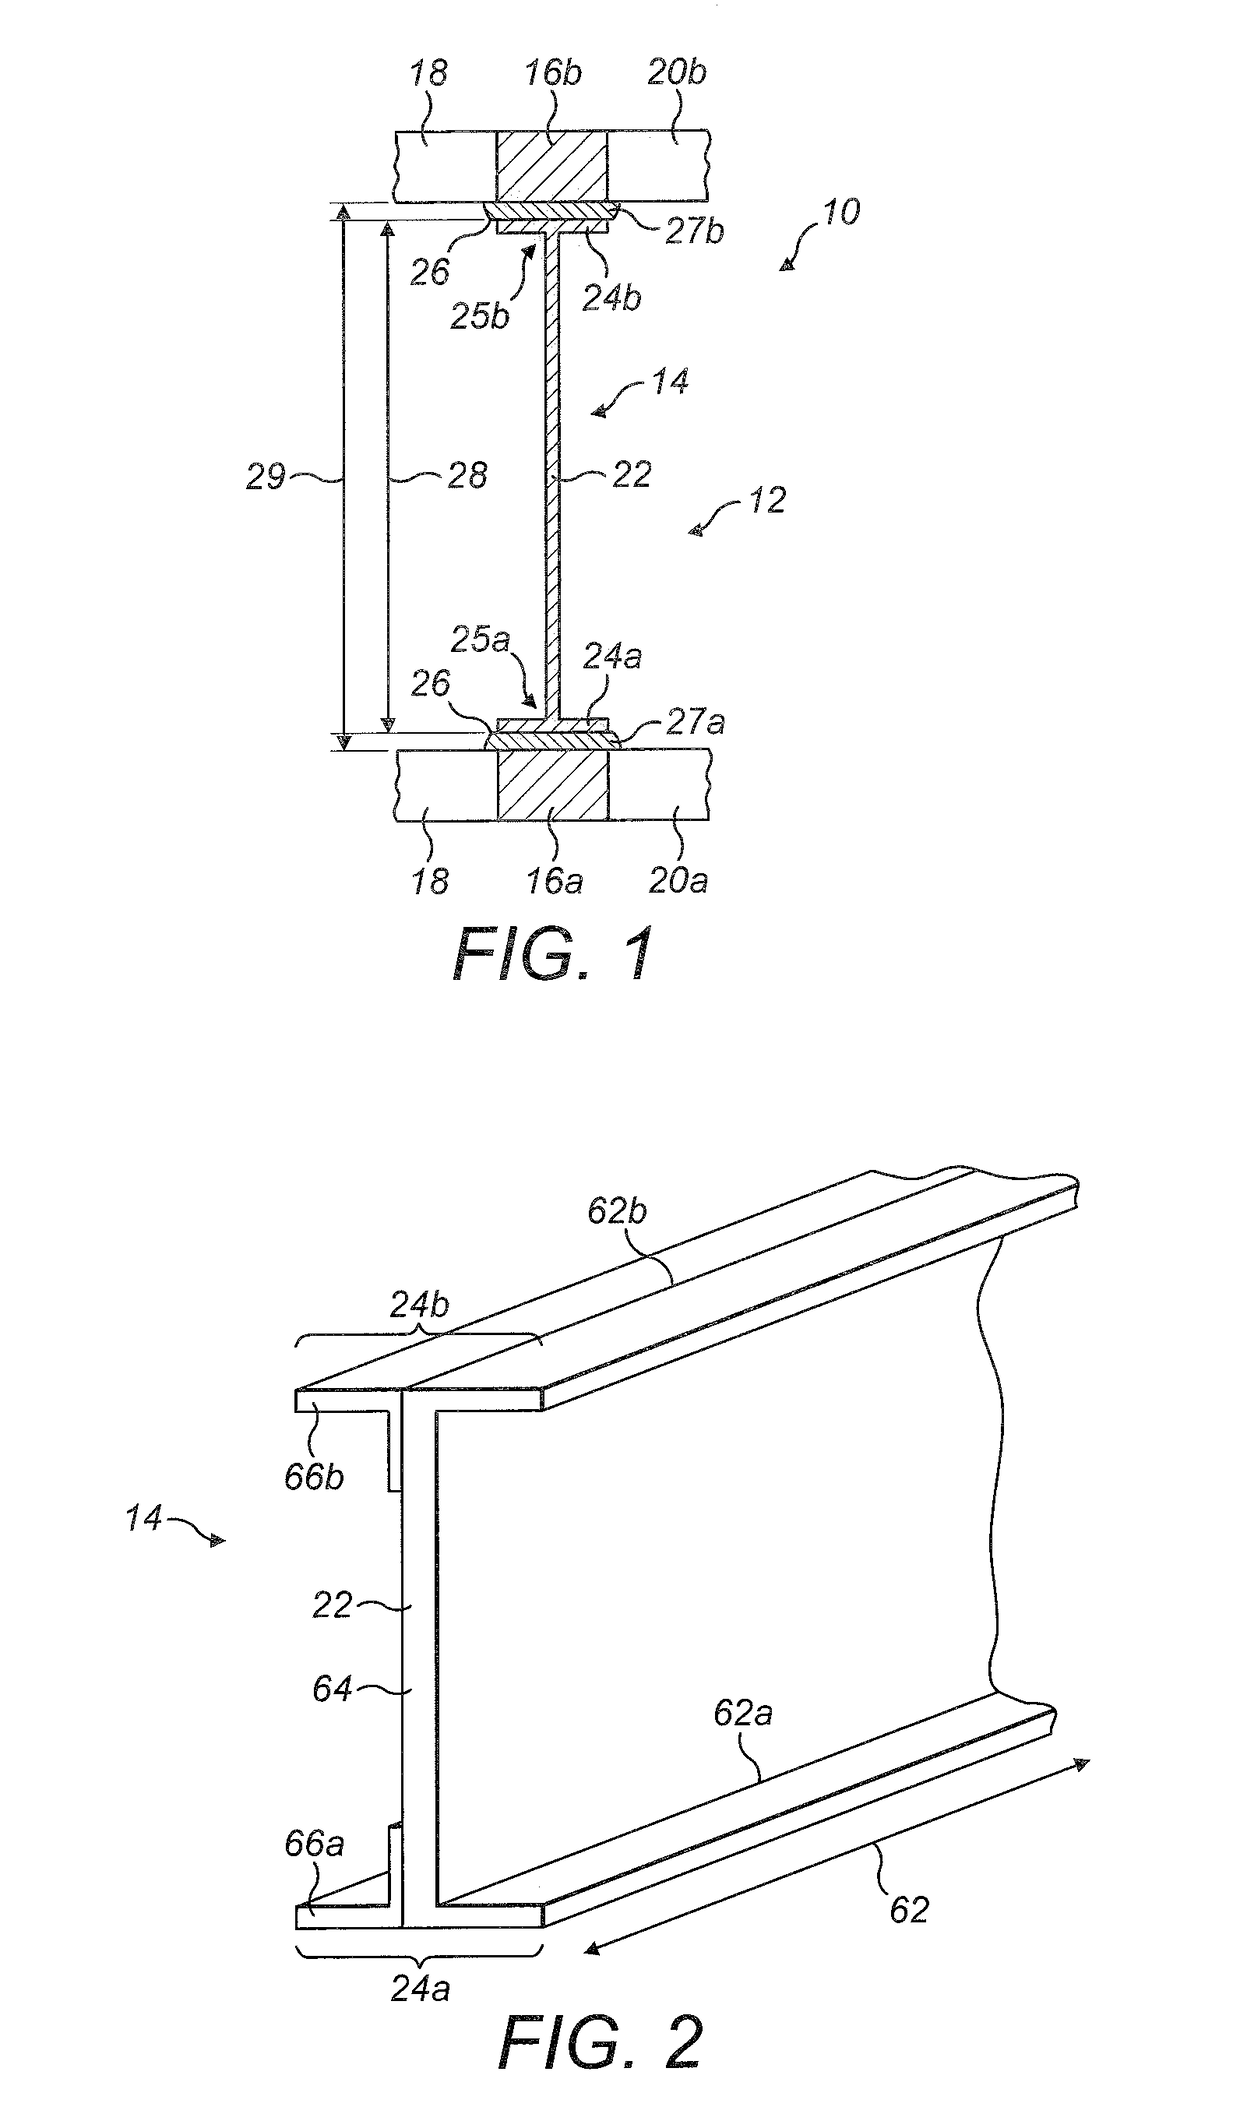 Reinforcing structure for a wind turbine blade